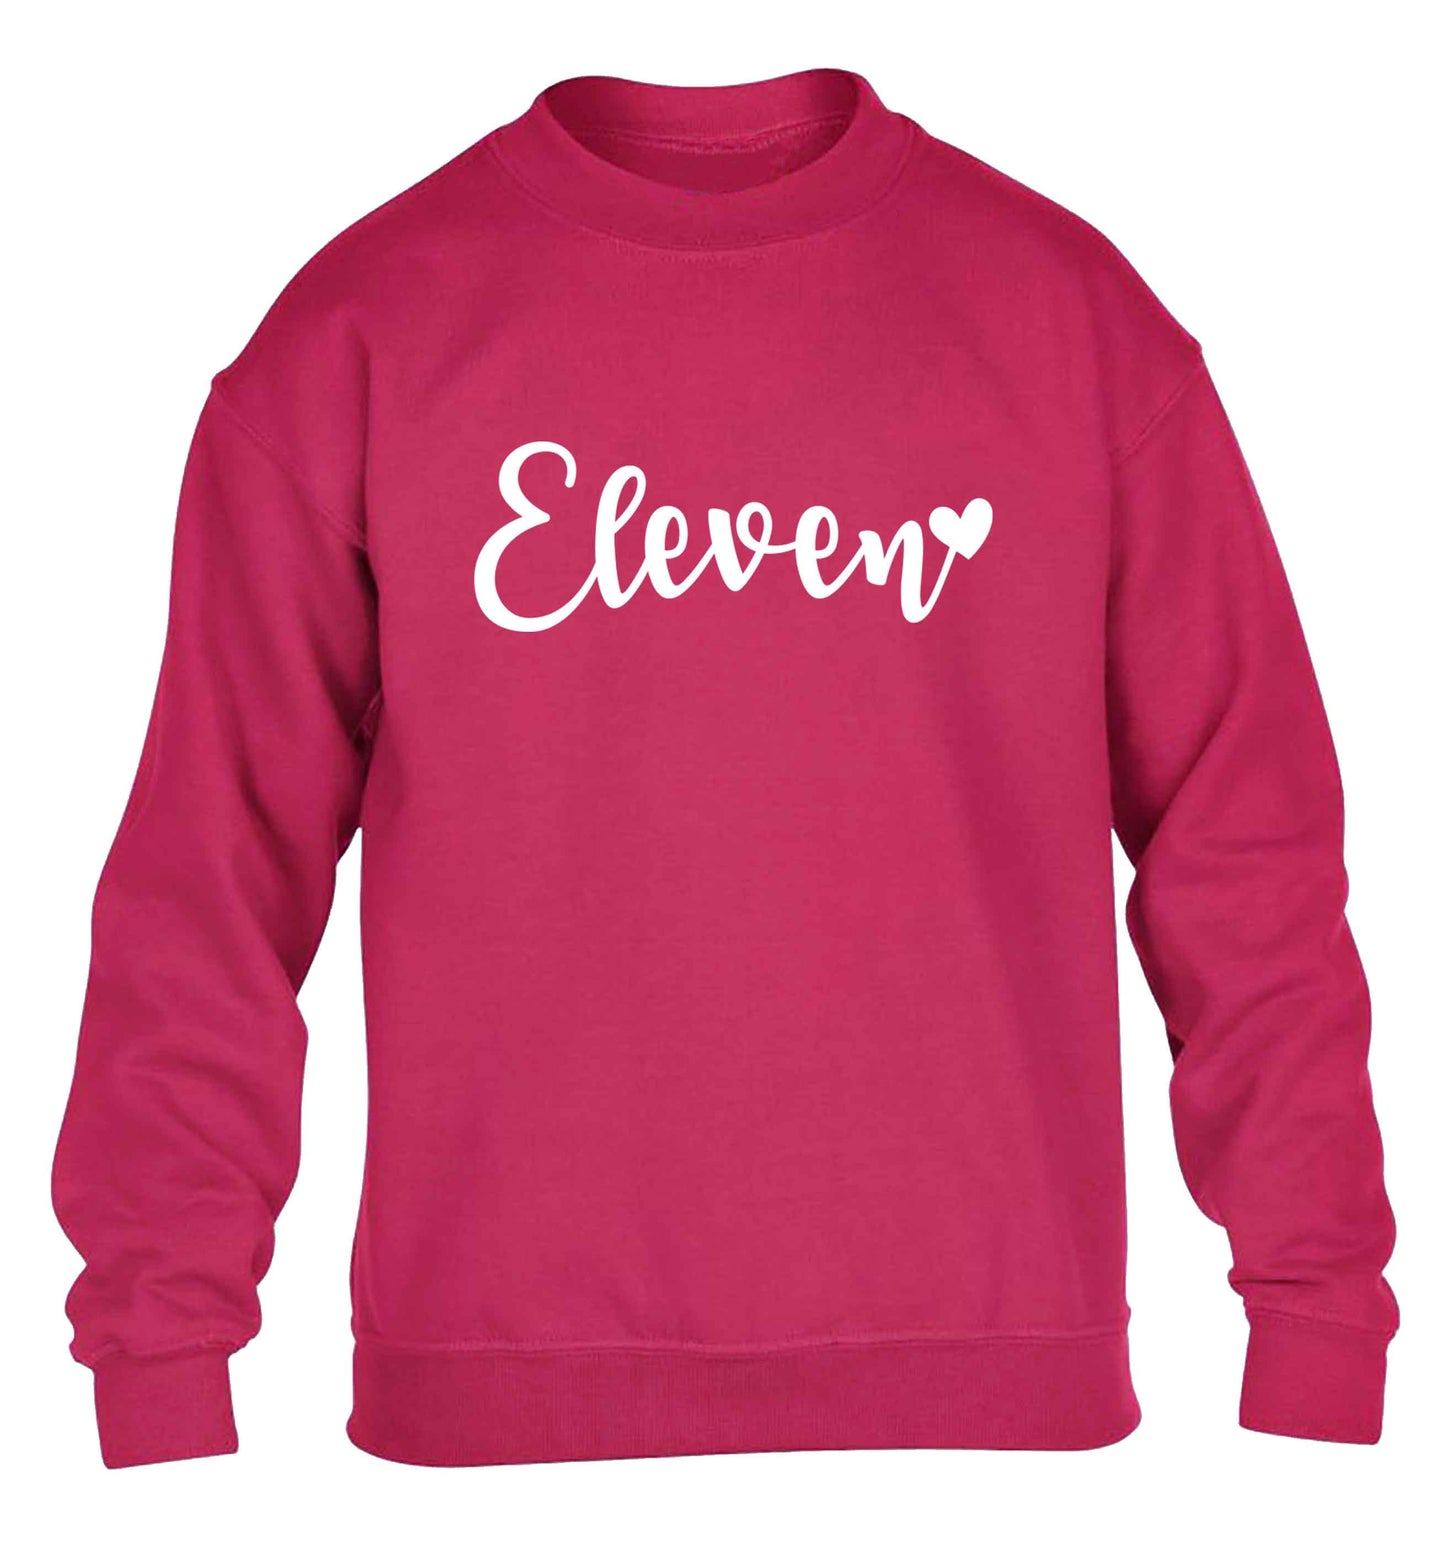 Eleven and heart! children's pink sweater 12-13 Years